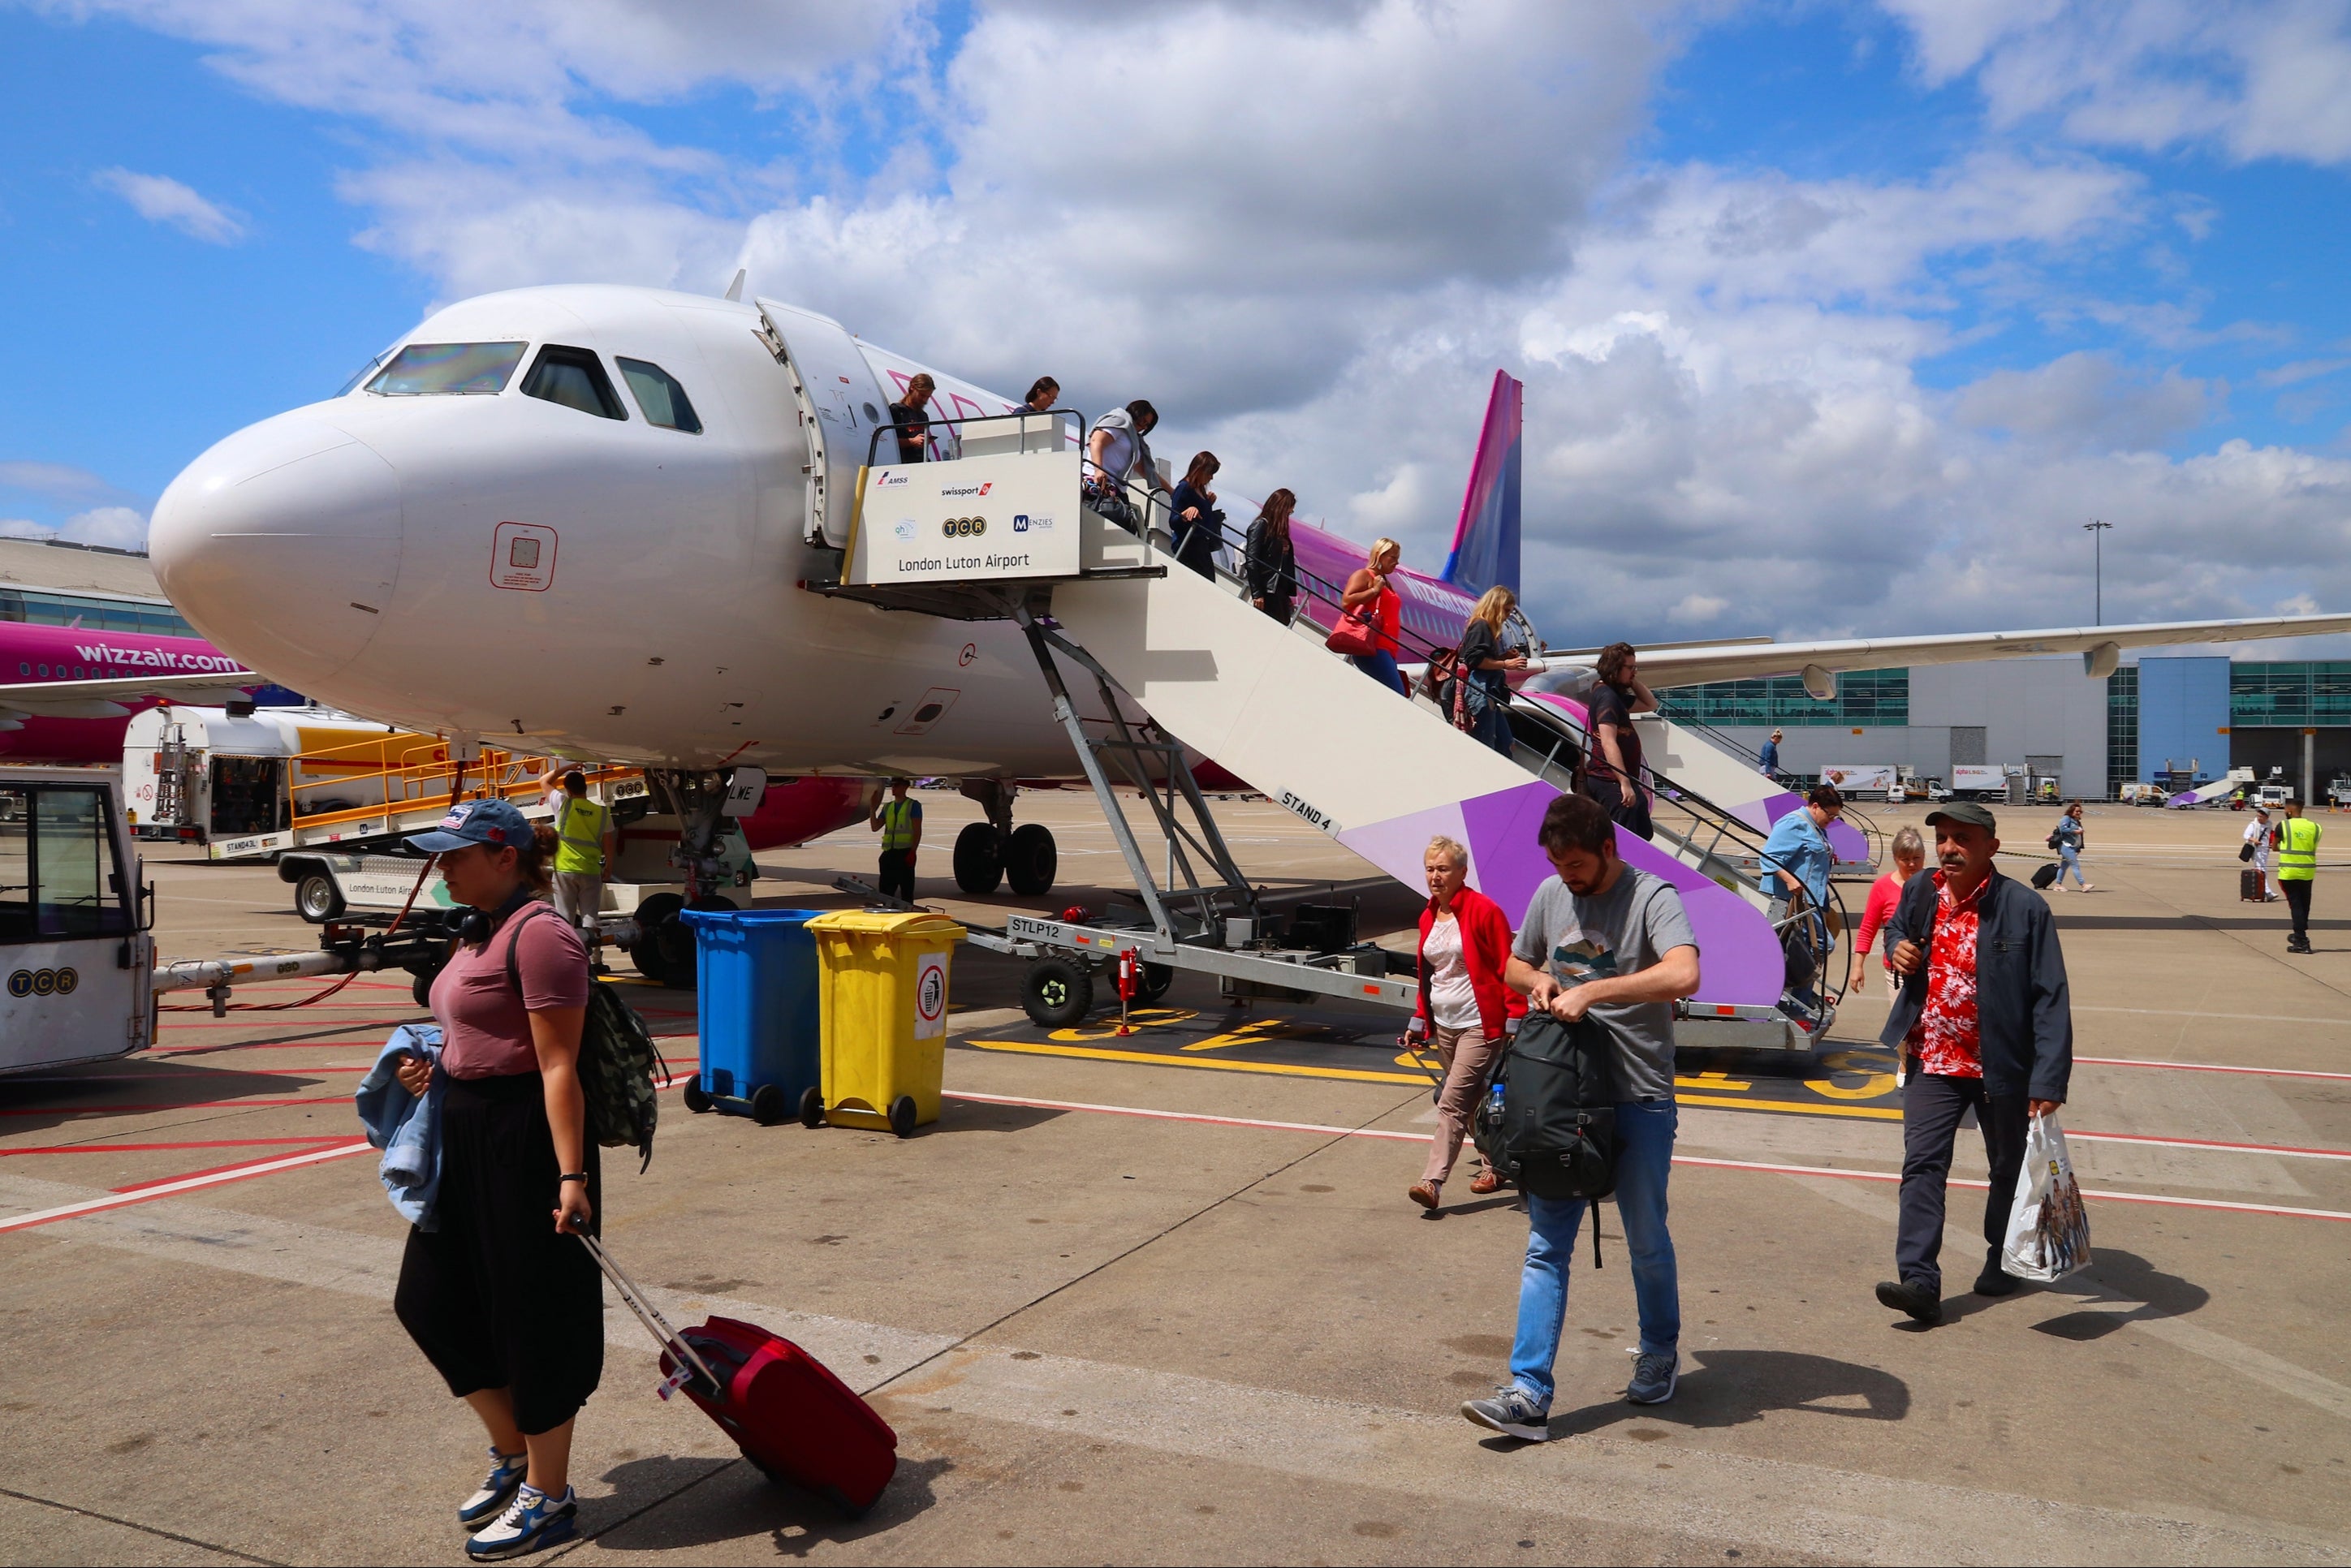 Wizz Air flies over 600 routes across Europe